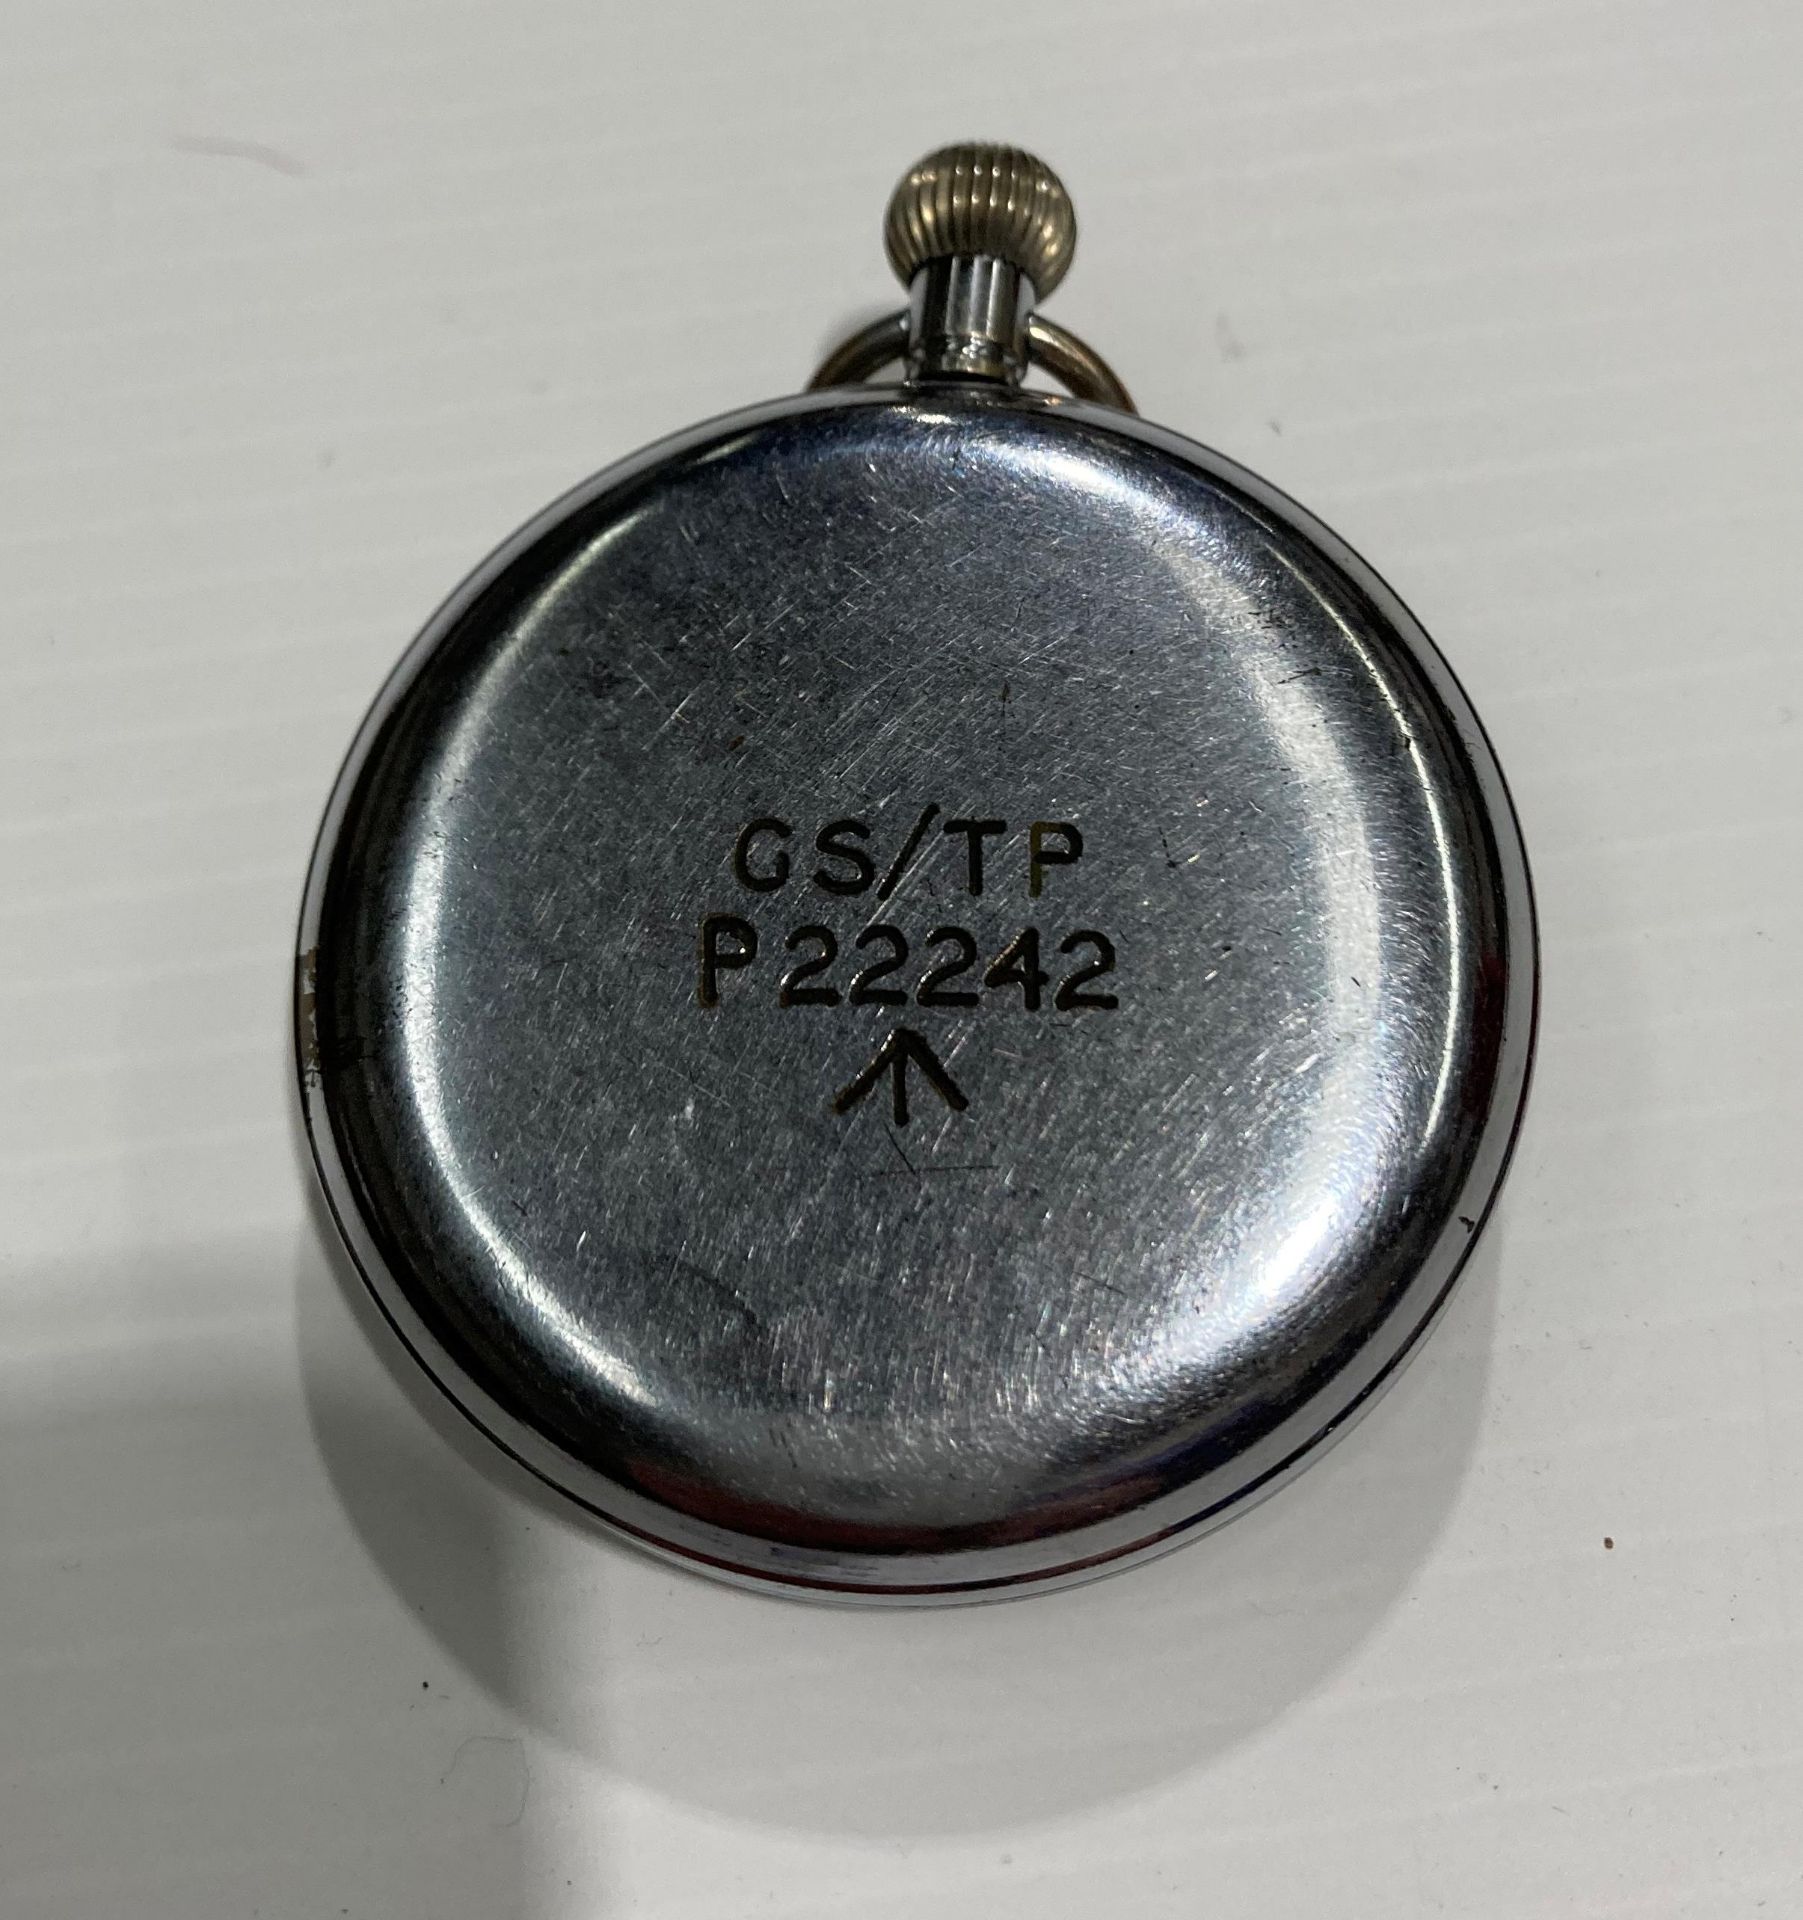 British WWII Military pocket watch by Helvetia Circa 1940 with stamp to back (G5/TP P22242) and - Bild 2 aus 4